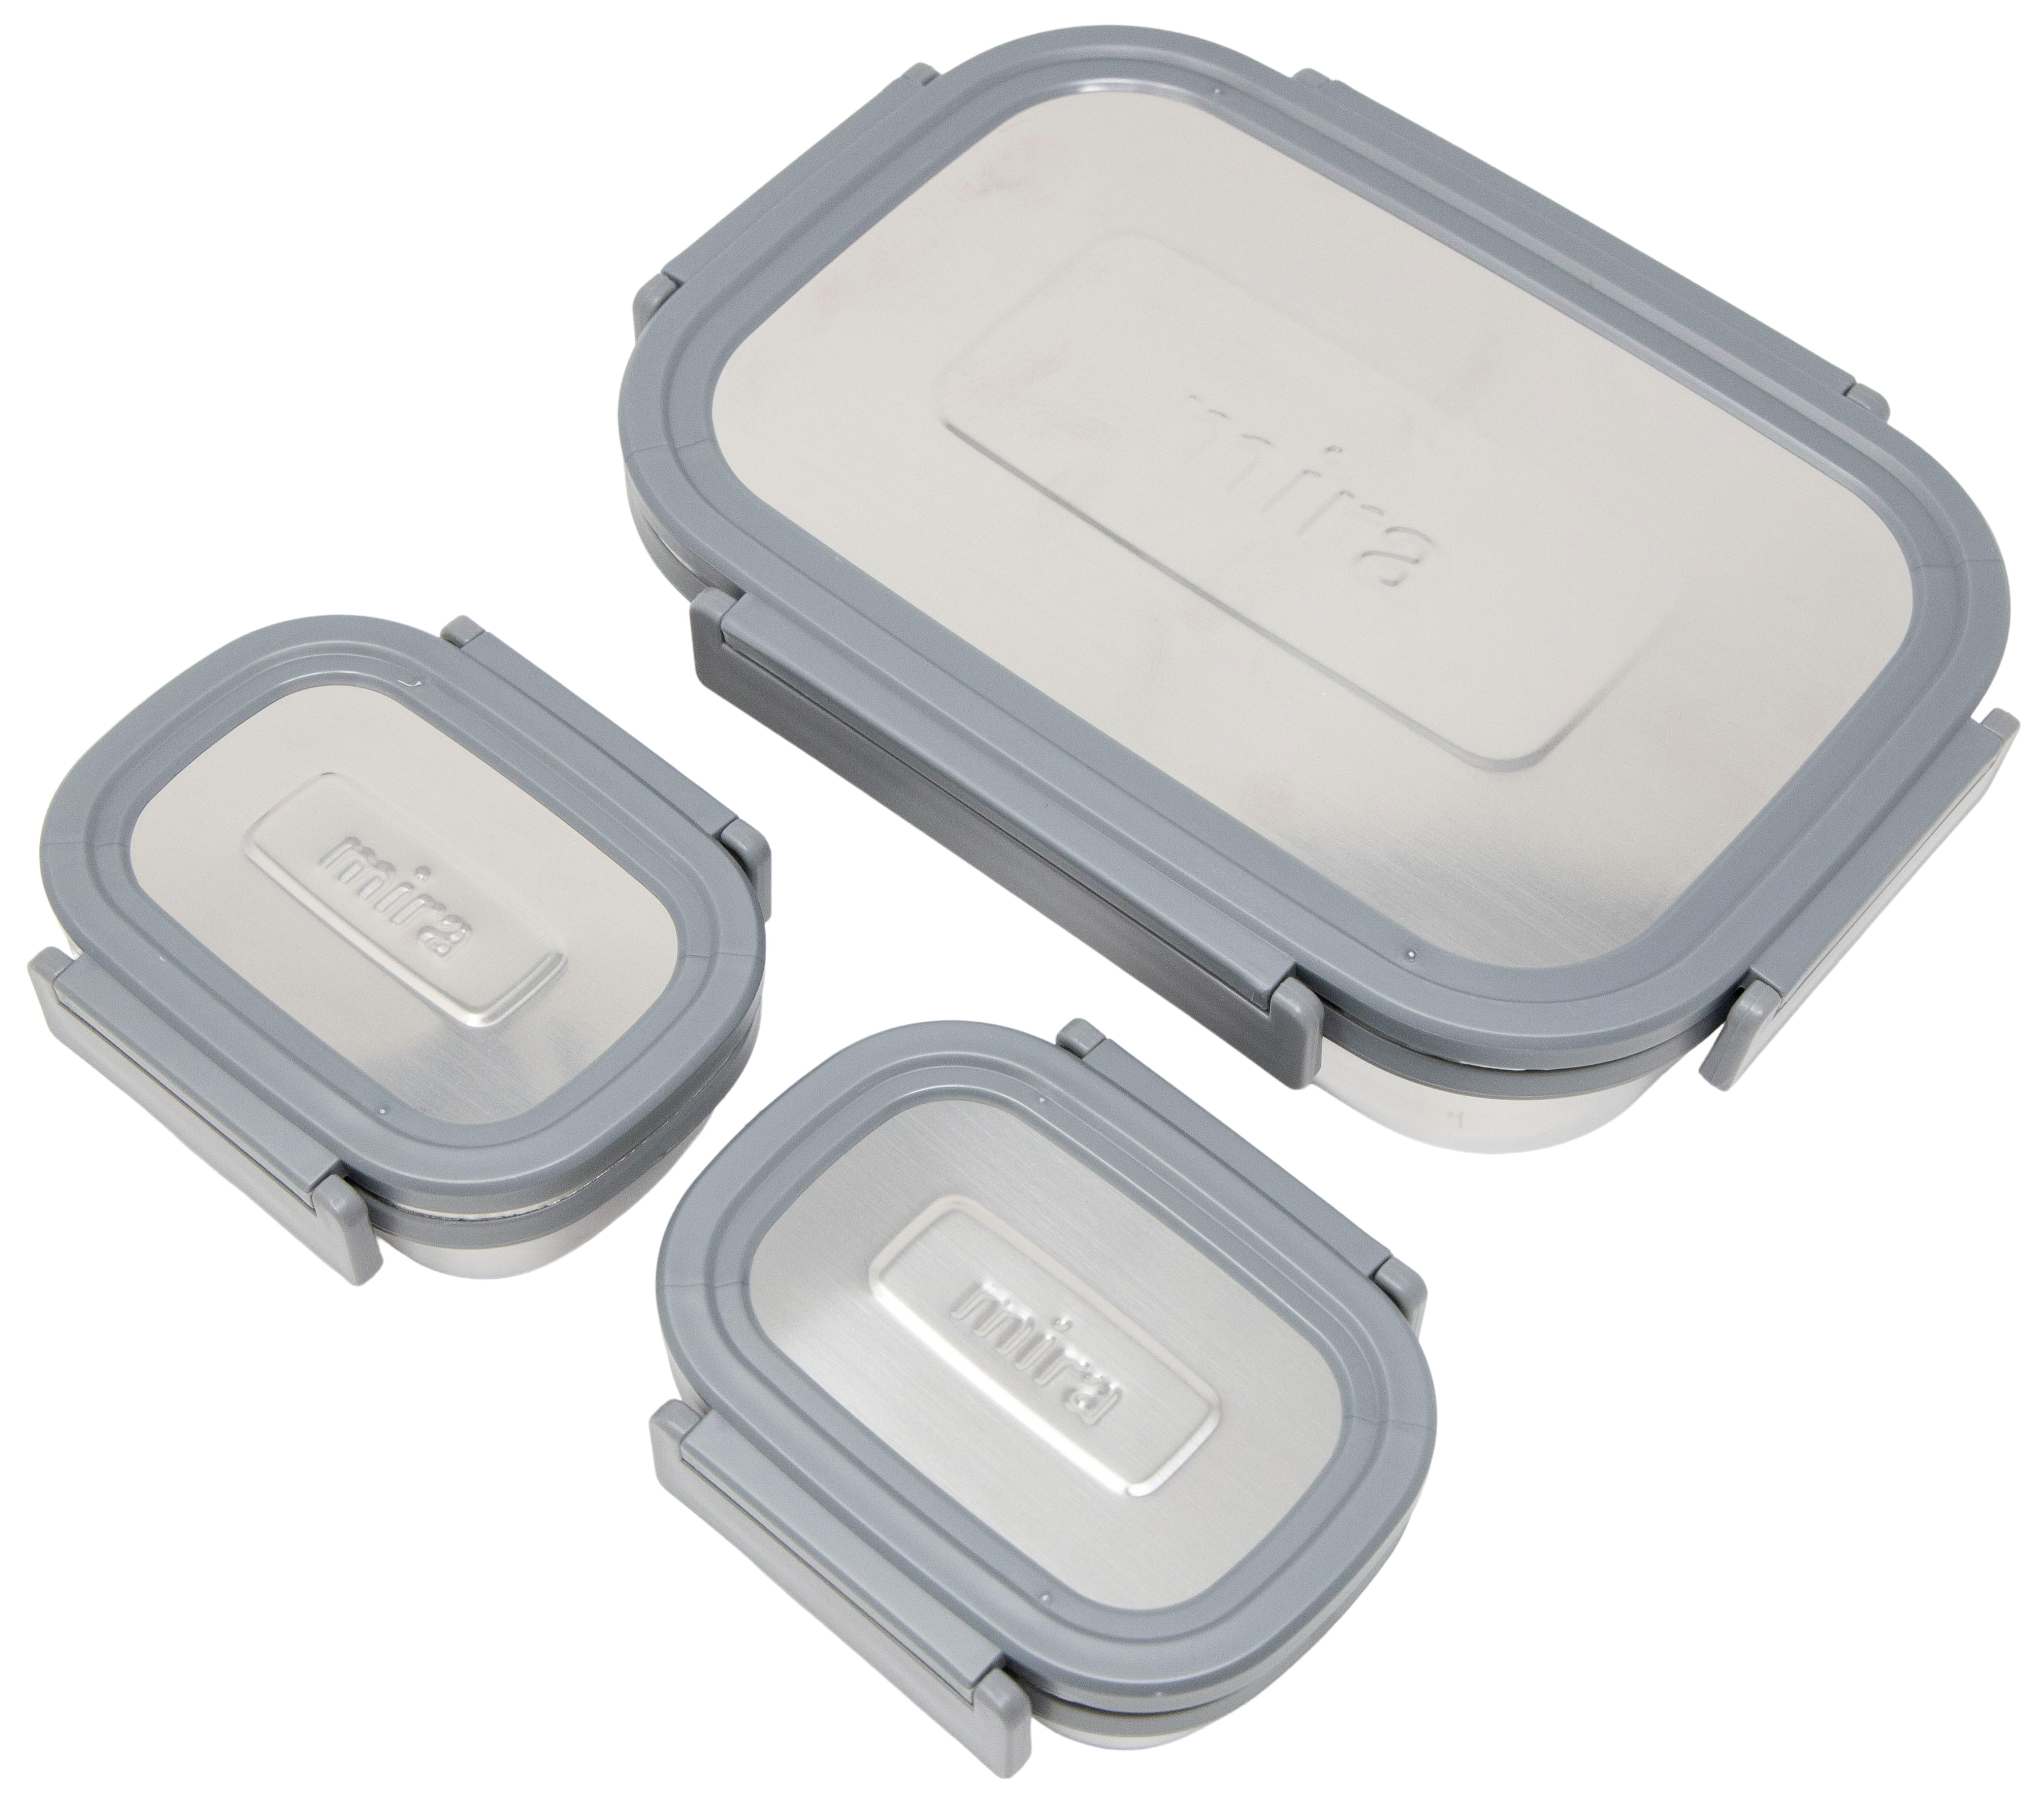 Food Storage Container Sale: Save on the Ailtec 18-Piece Set